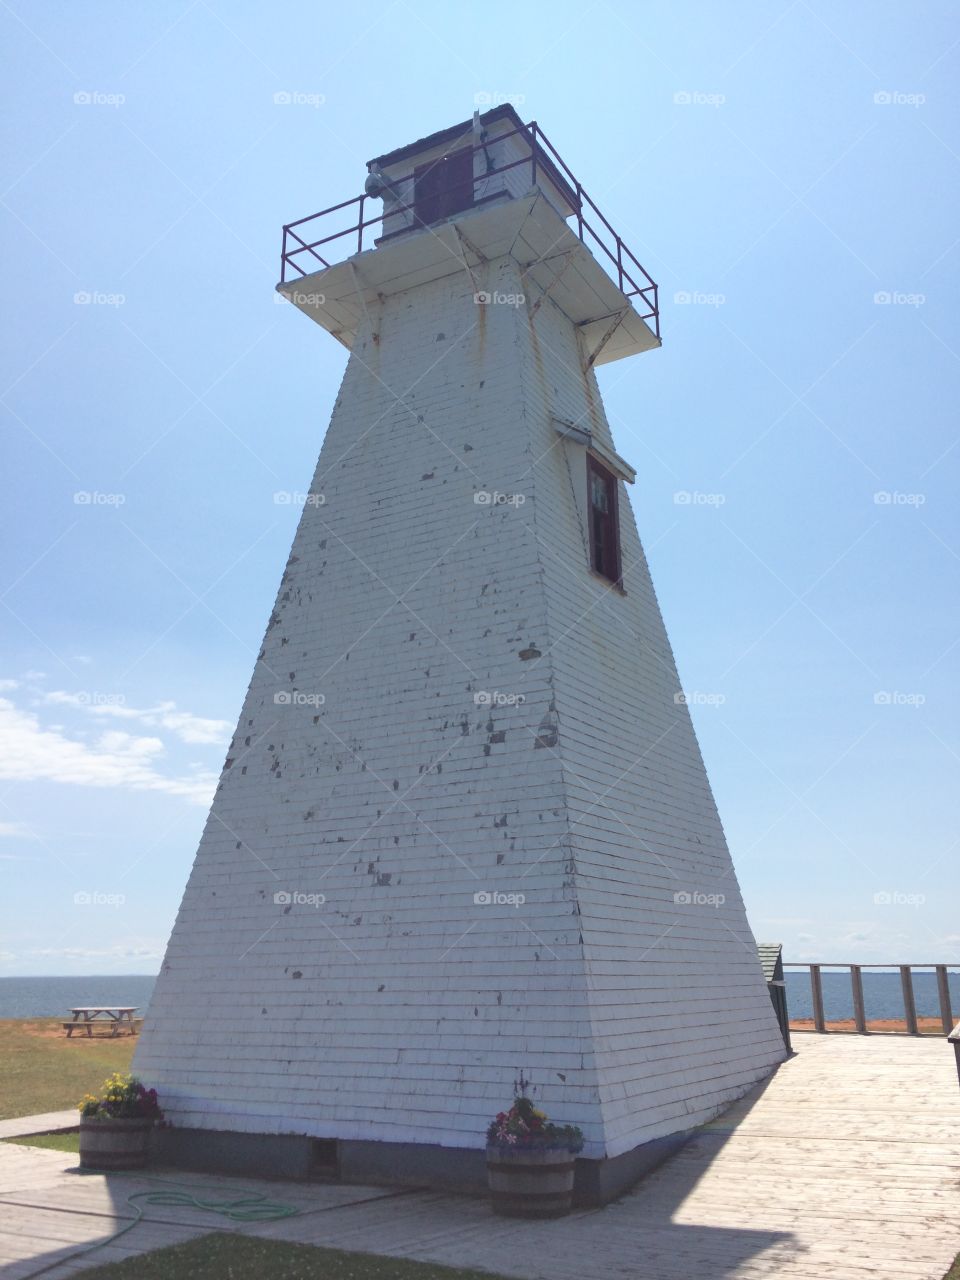 An iconic lighthouse situated on the shore of Prince Edward Island, right next to the famous Confederation Bridge.